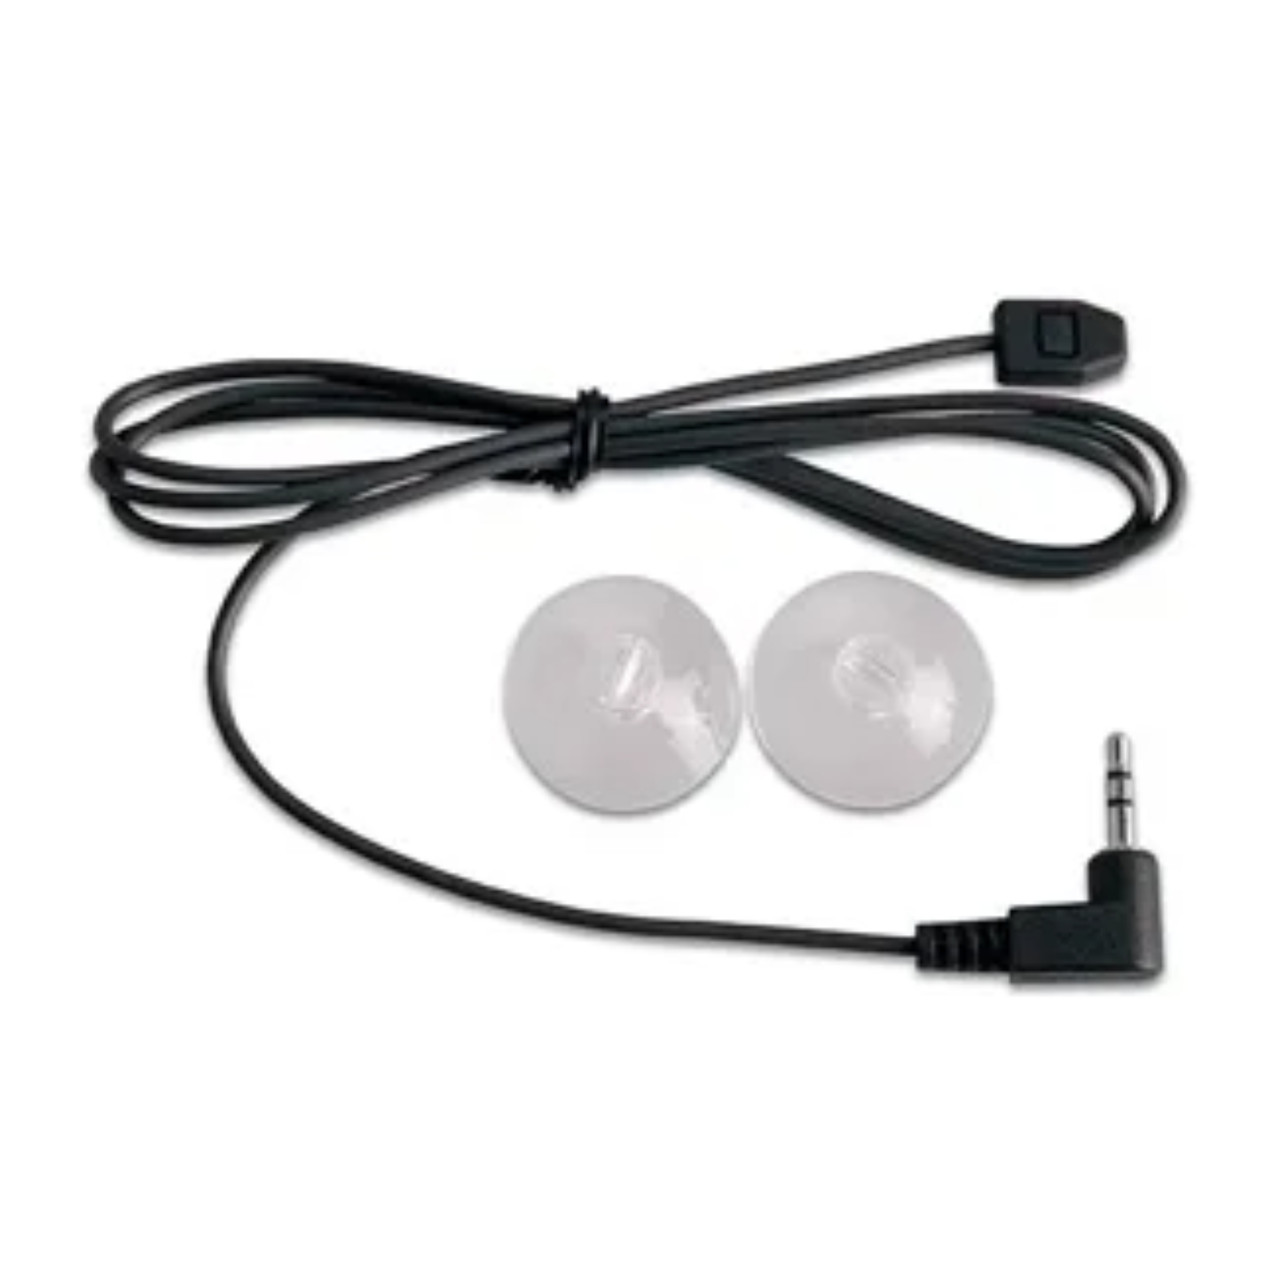 Garmin New OEM Antenna Extension Cable with Suction Cups, 010-11282-00